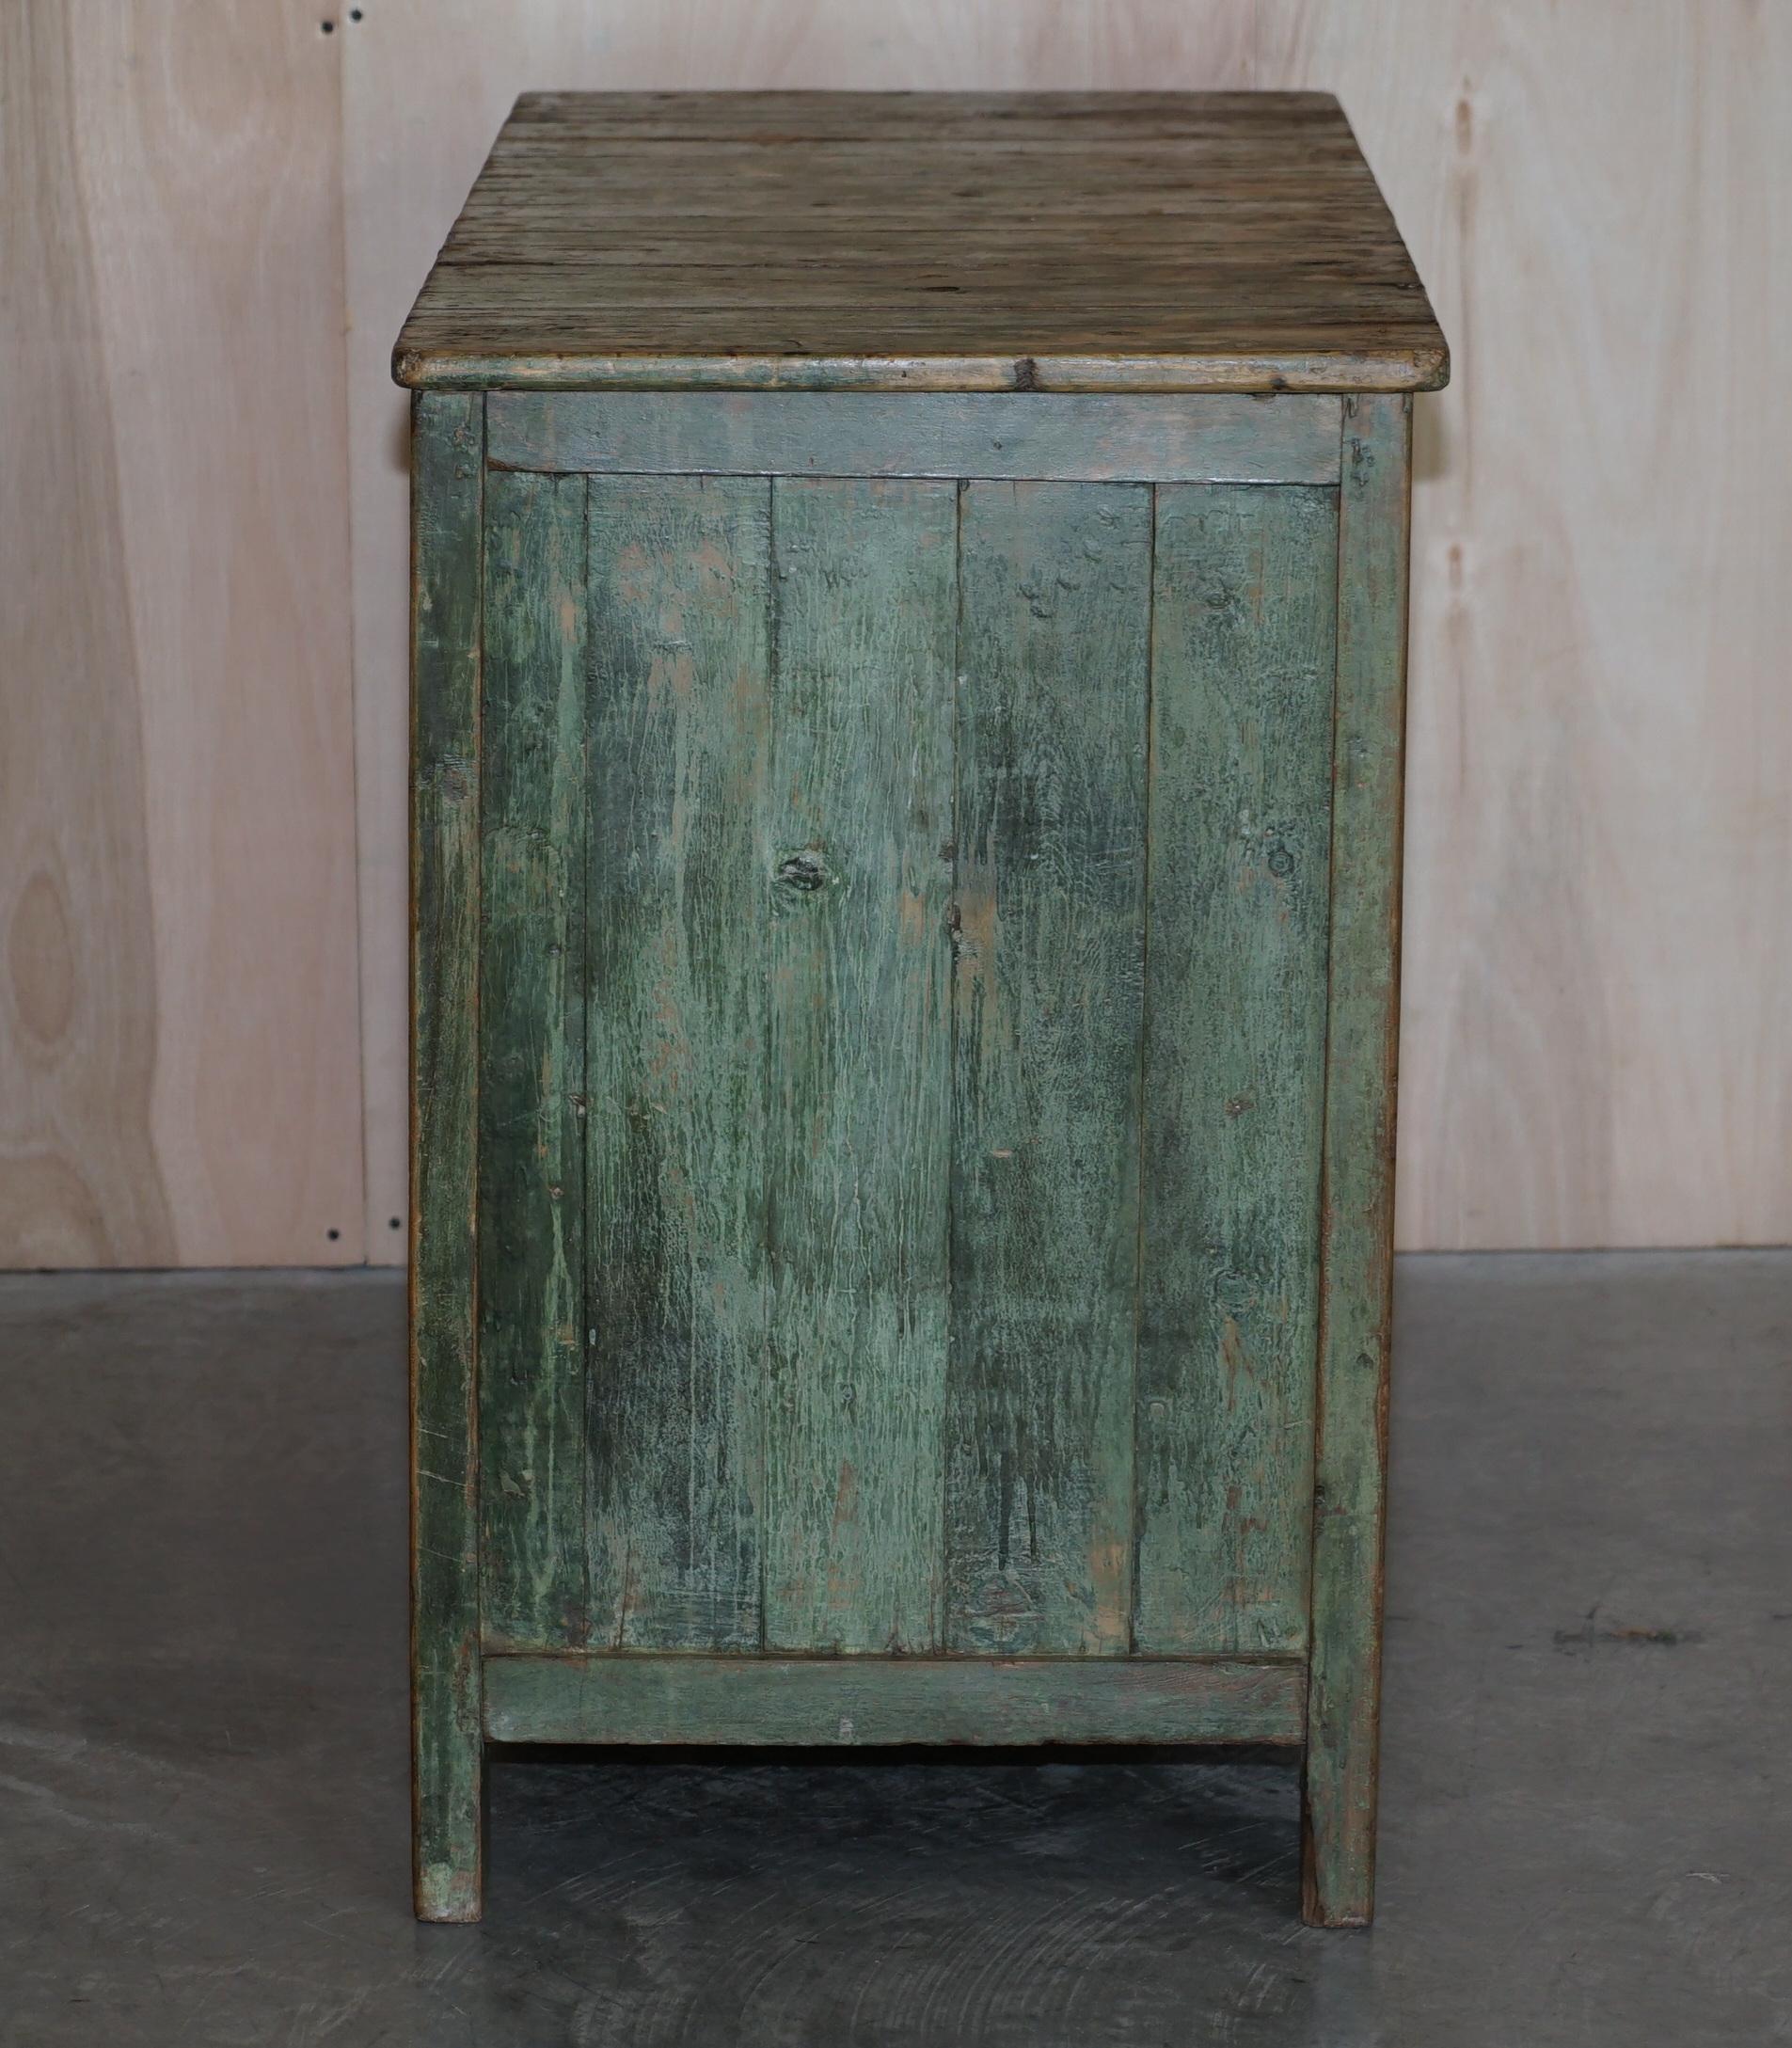 Antique circa 1900 Hand Painted Green Distressed Sideboard Cupboard Cabinet 8